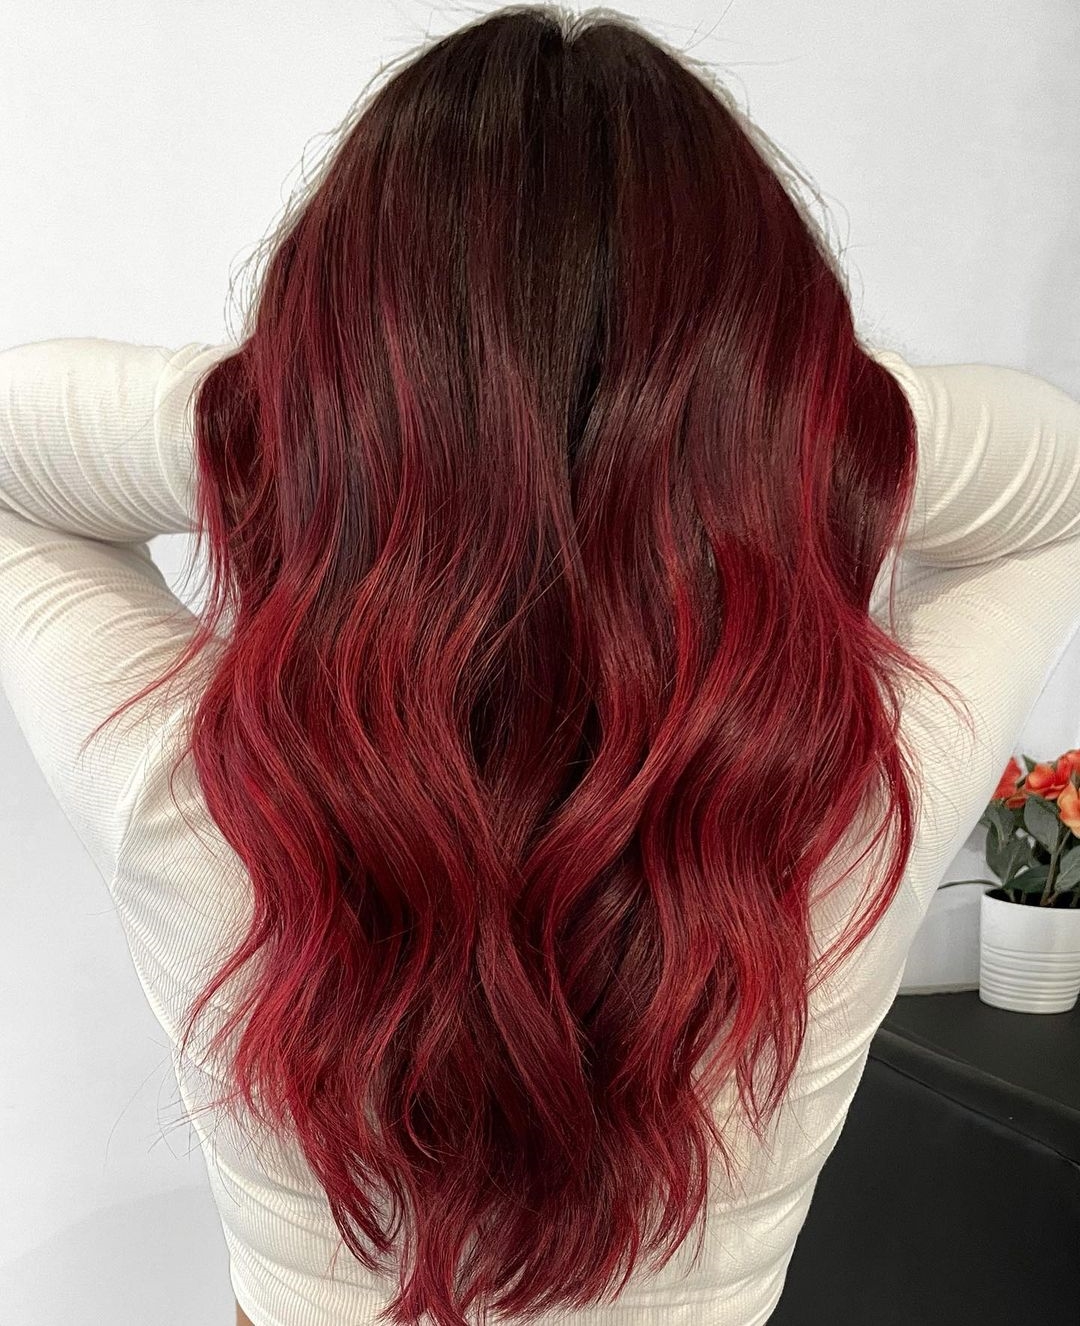 Fabulous Long Red Haircut with Waves